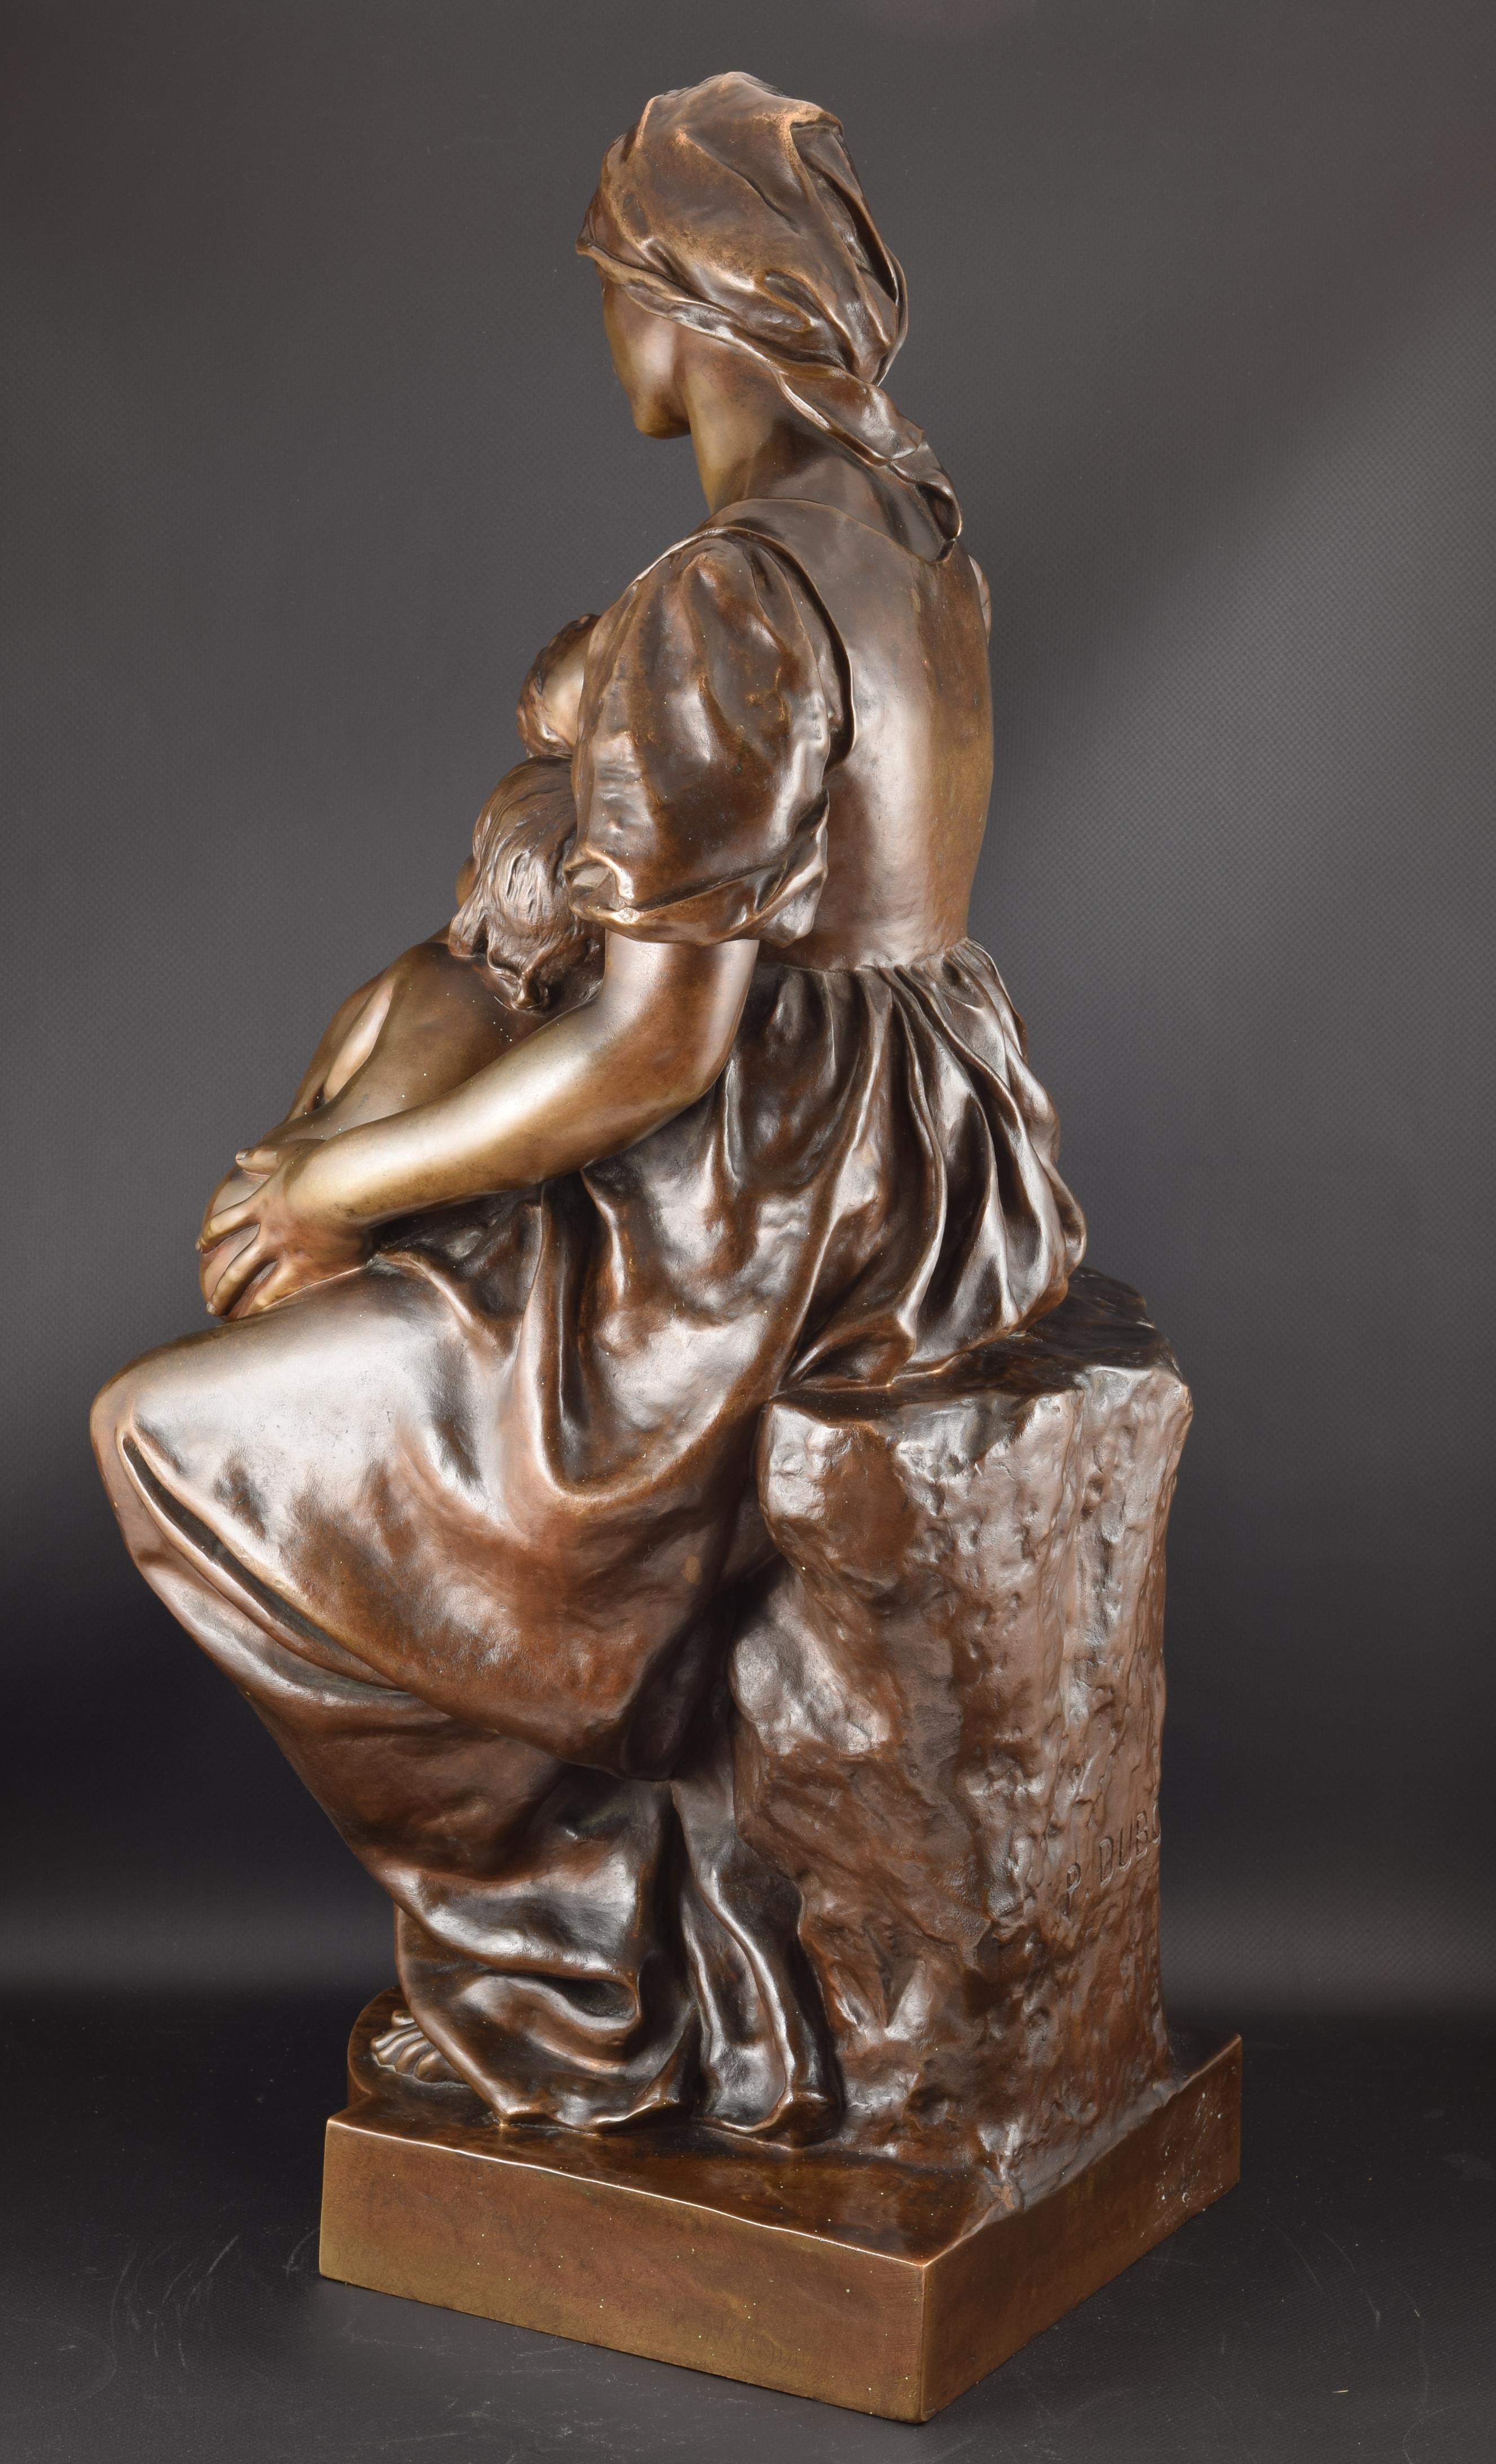 Neoclassical “Charity”, Bronze, 19th Century French School, Signed Paul Dubois